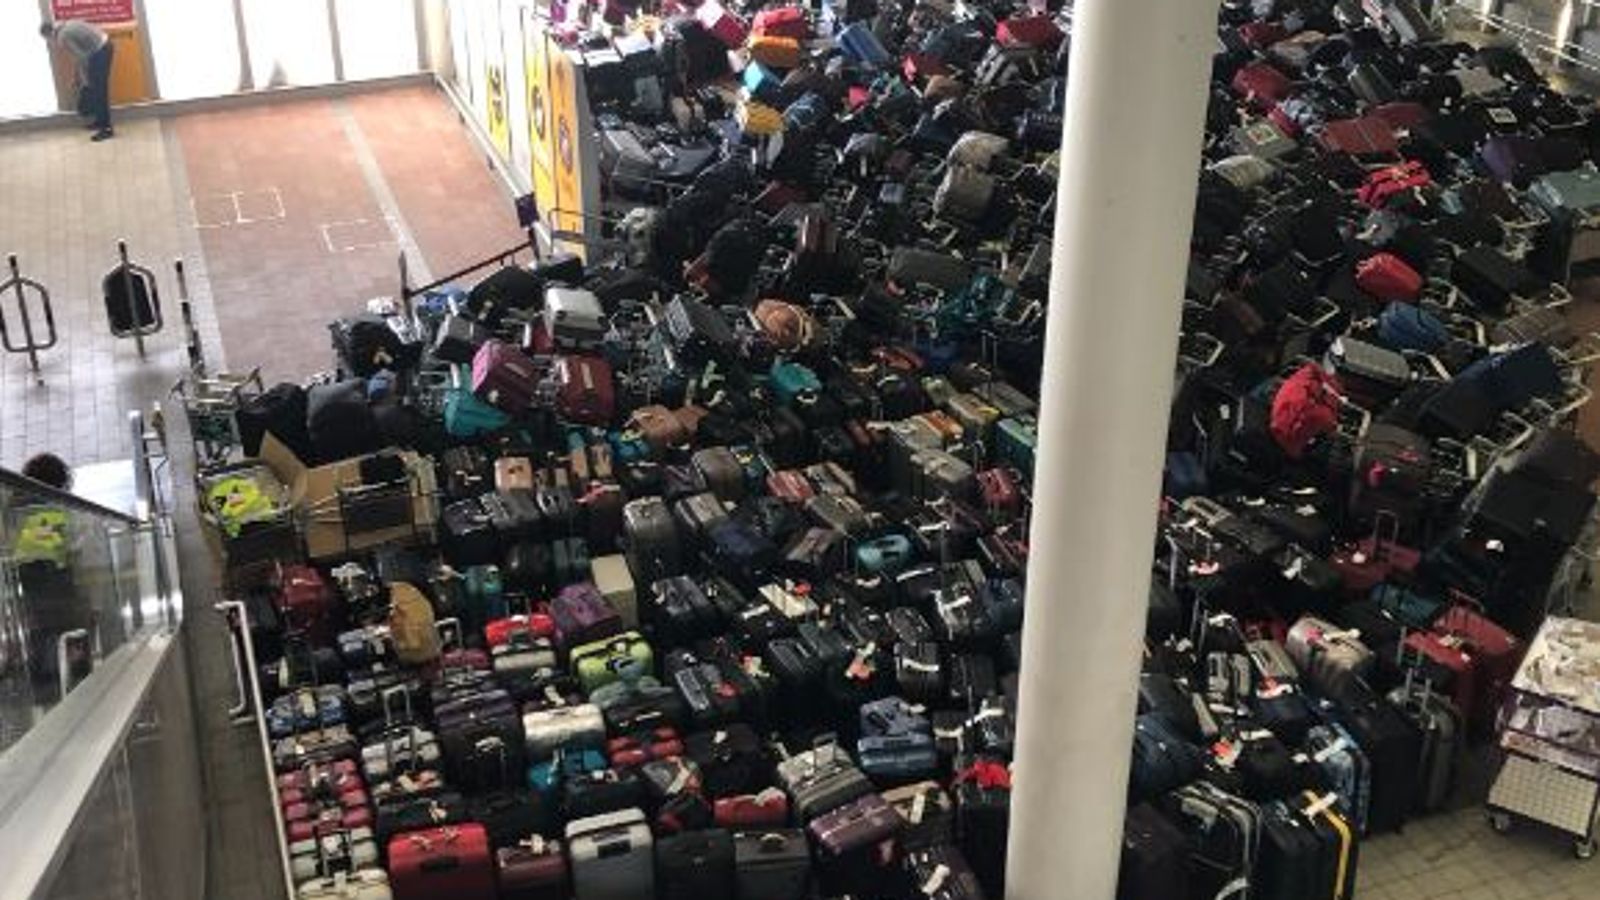 Heathrow asks airlines to cancel 10% of flights today as airport faces baggage backlog